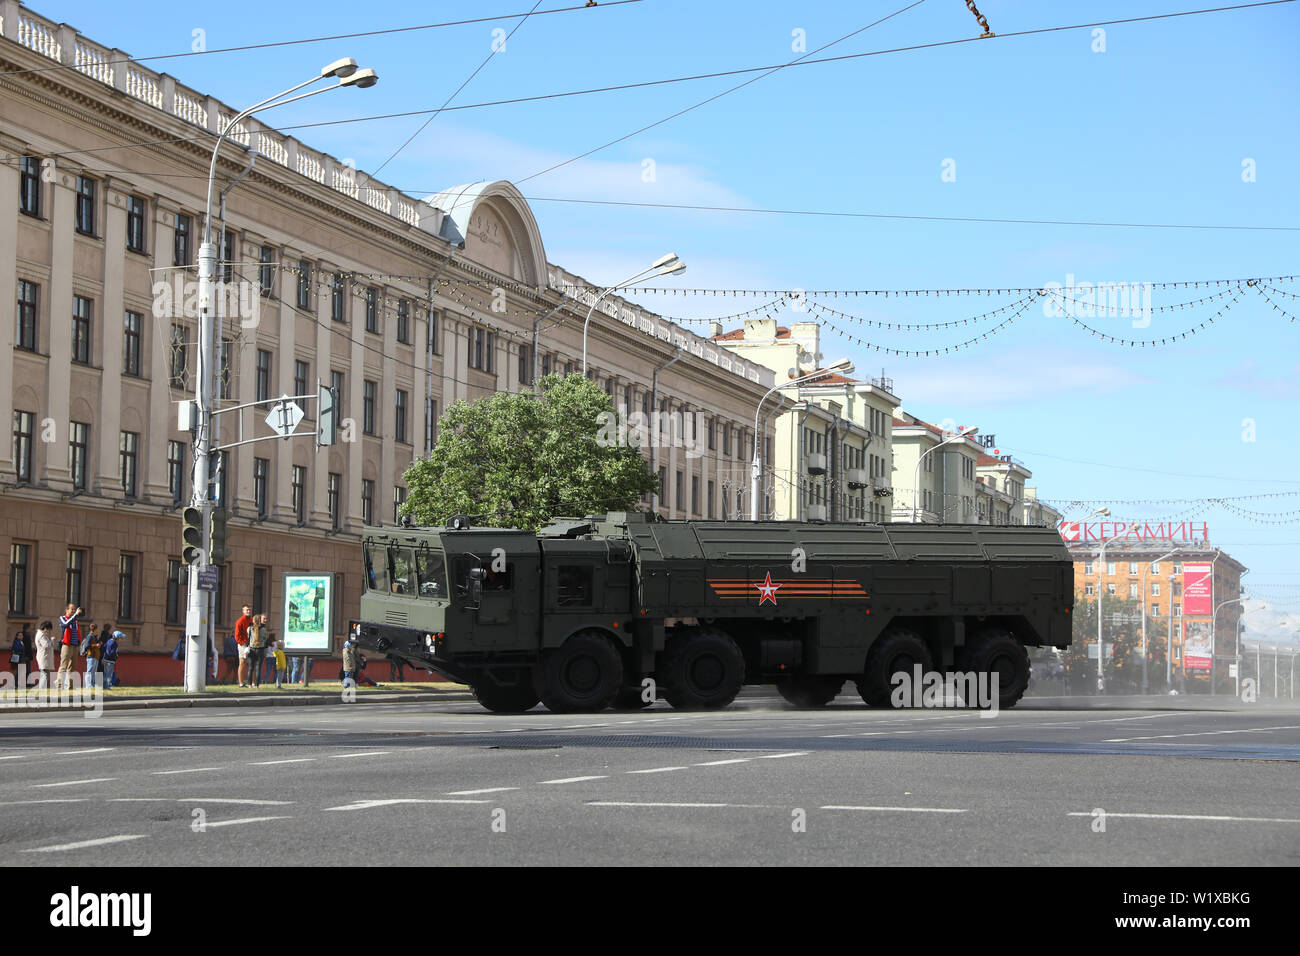 Minsk, Belarus - July 3, 2019: military vehicles on its way to the parade of the Independence Day of Belarus on July 3rd. Tanks in the city center. Stock Photo